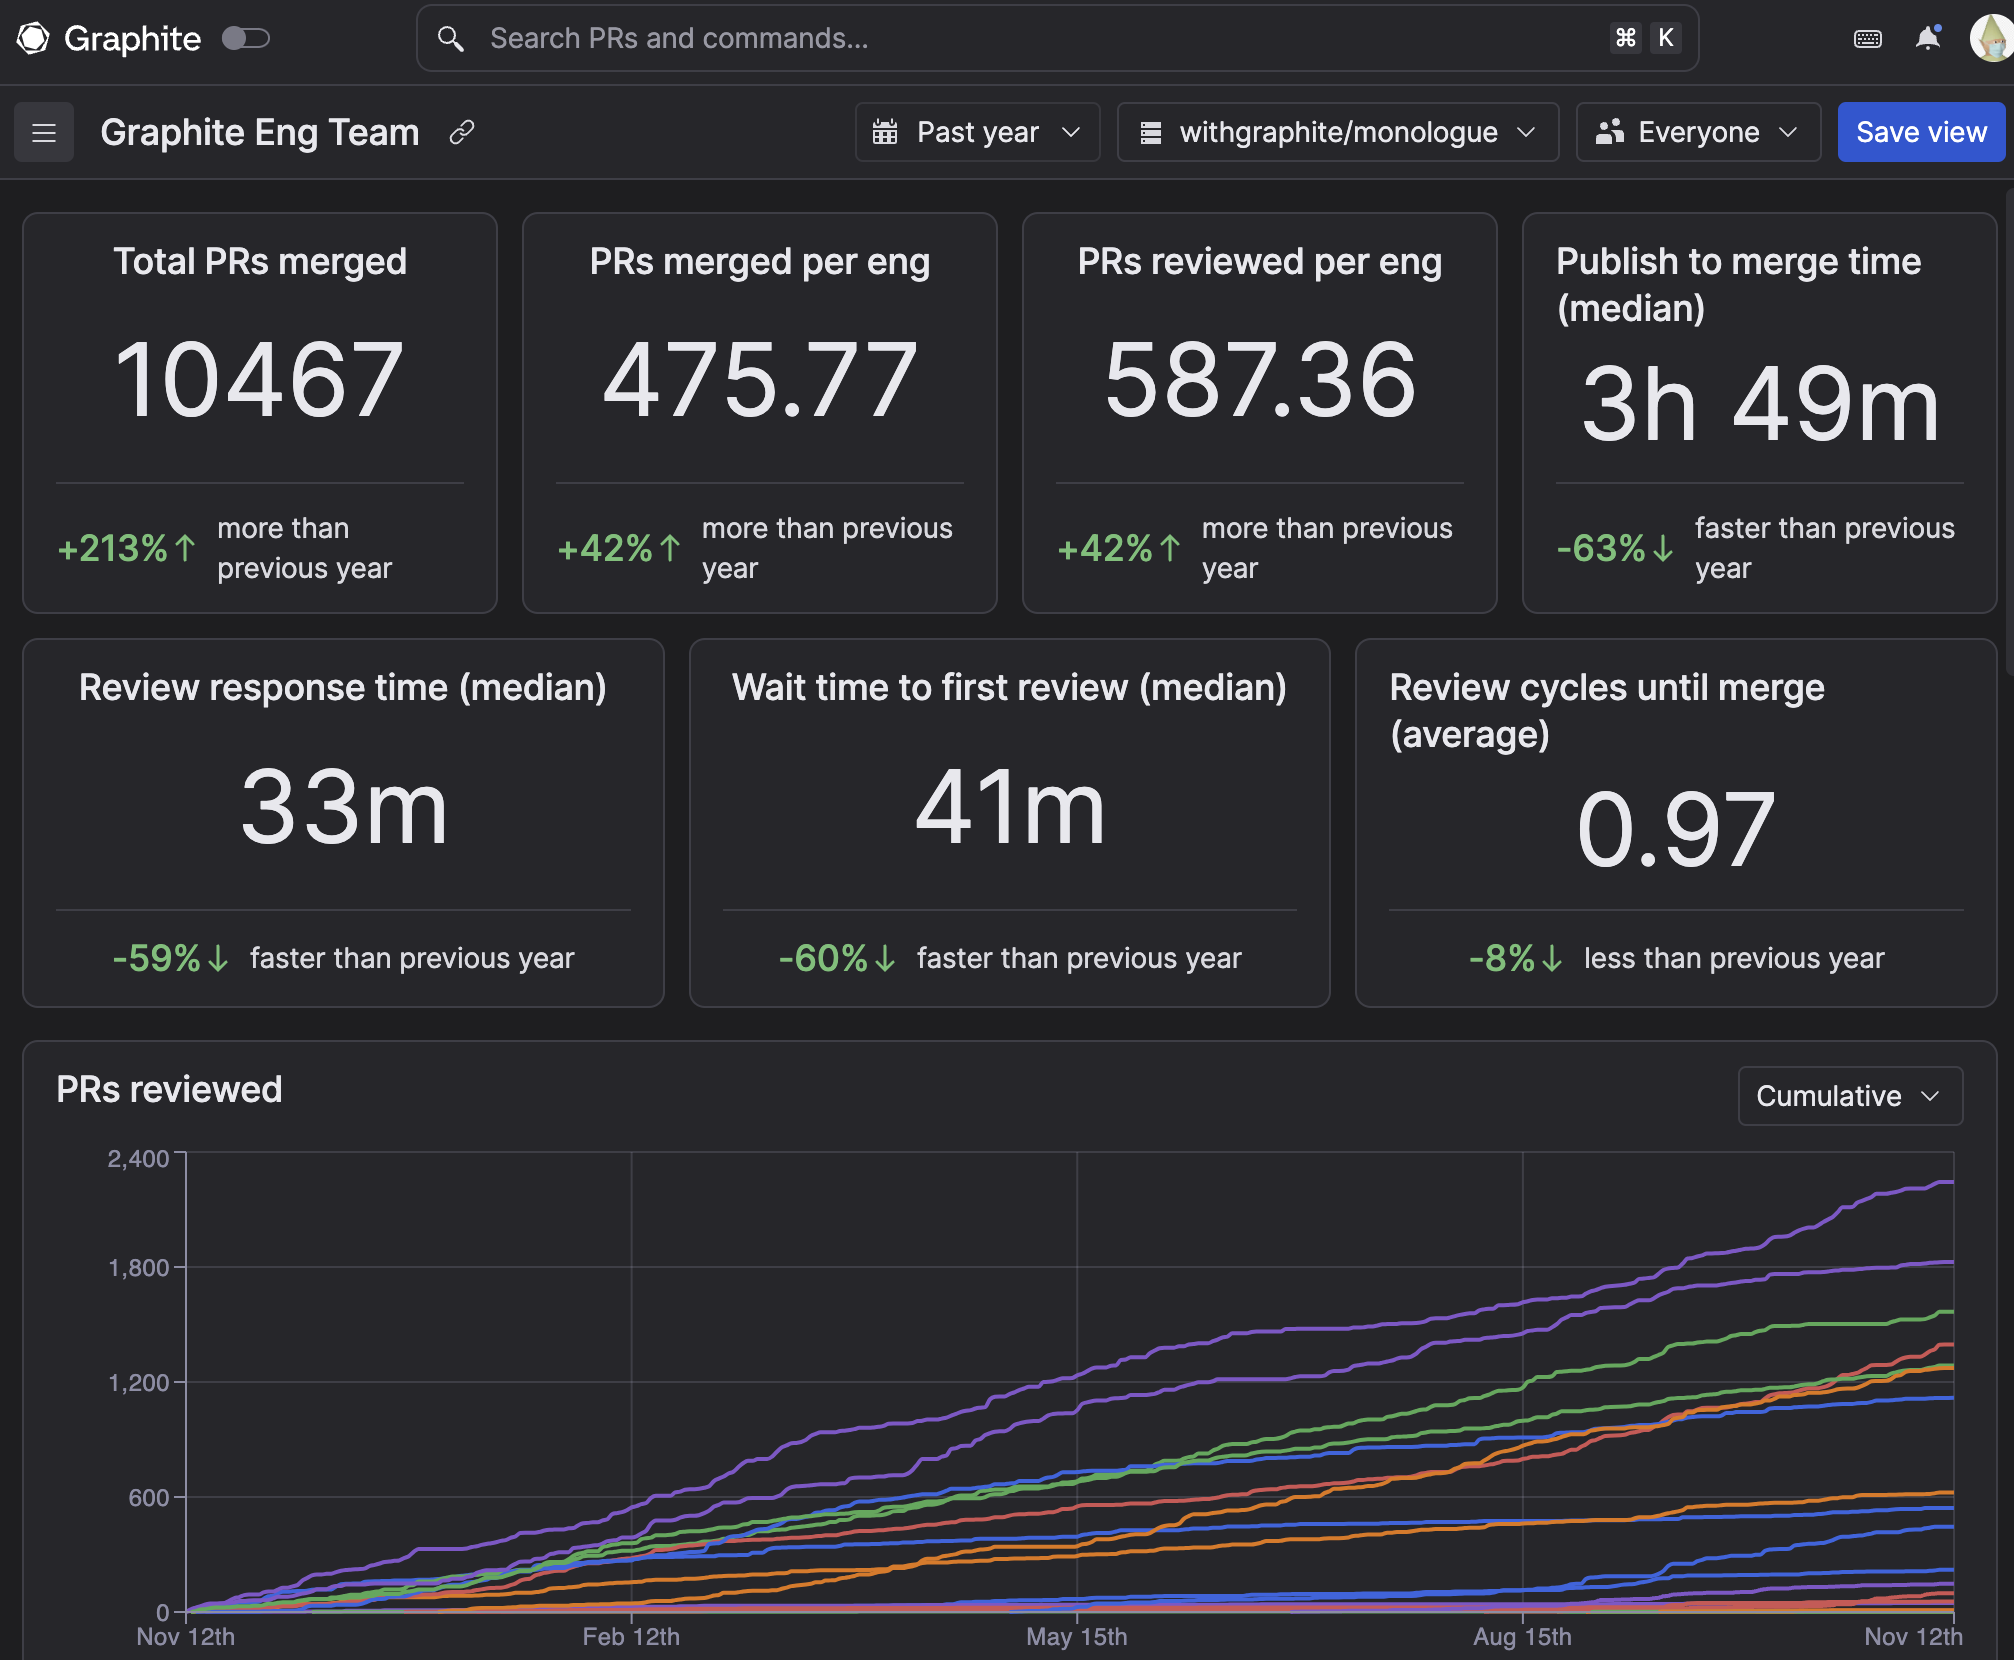 screenshot of Graphite insights showing stats of Graphite eng team